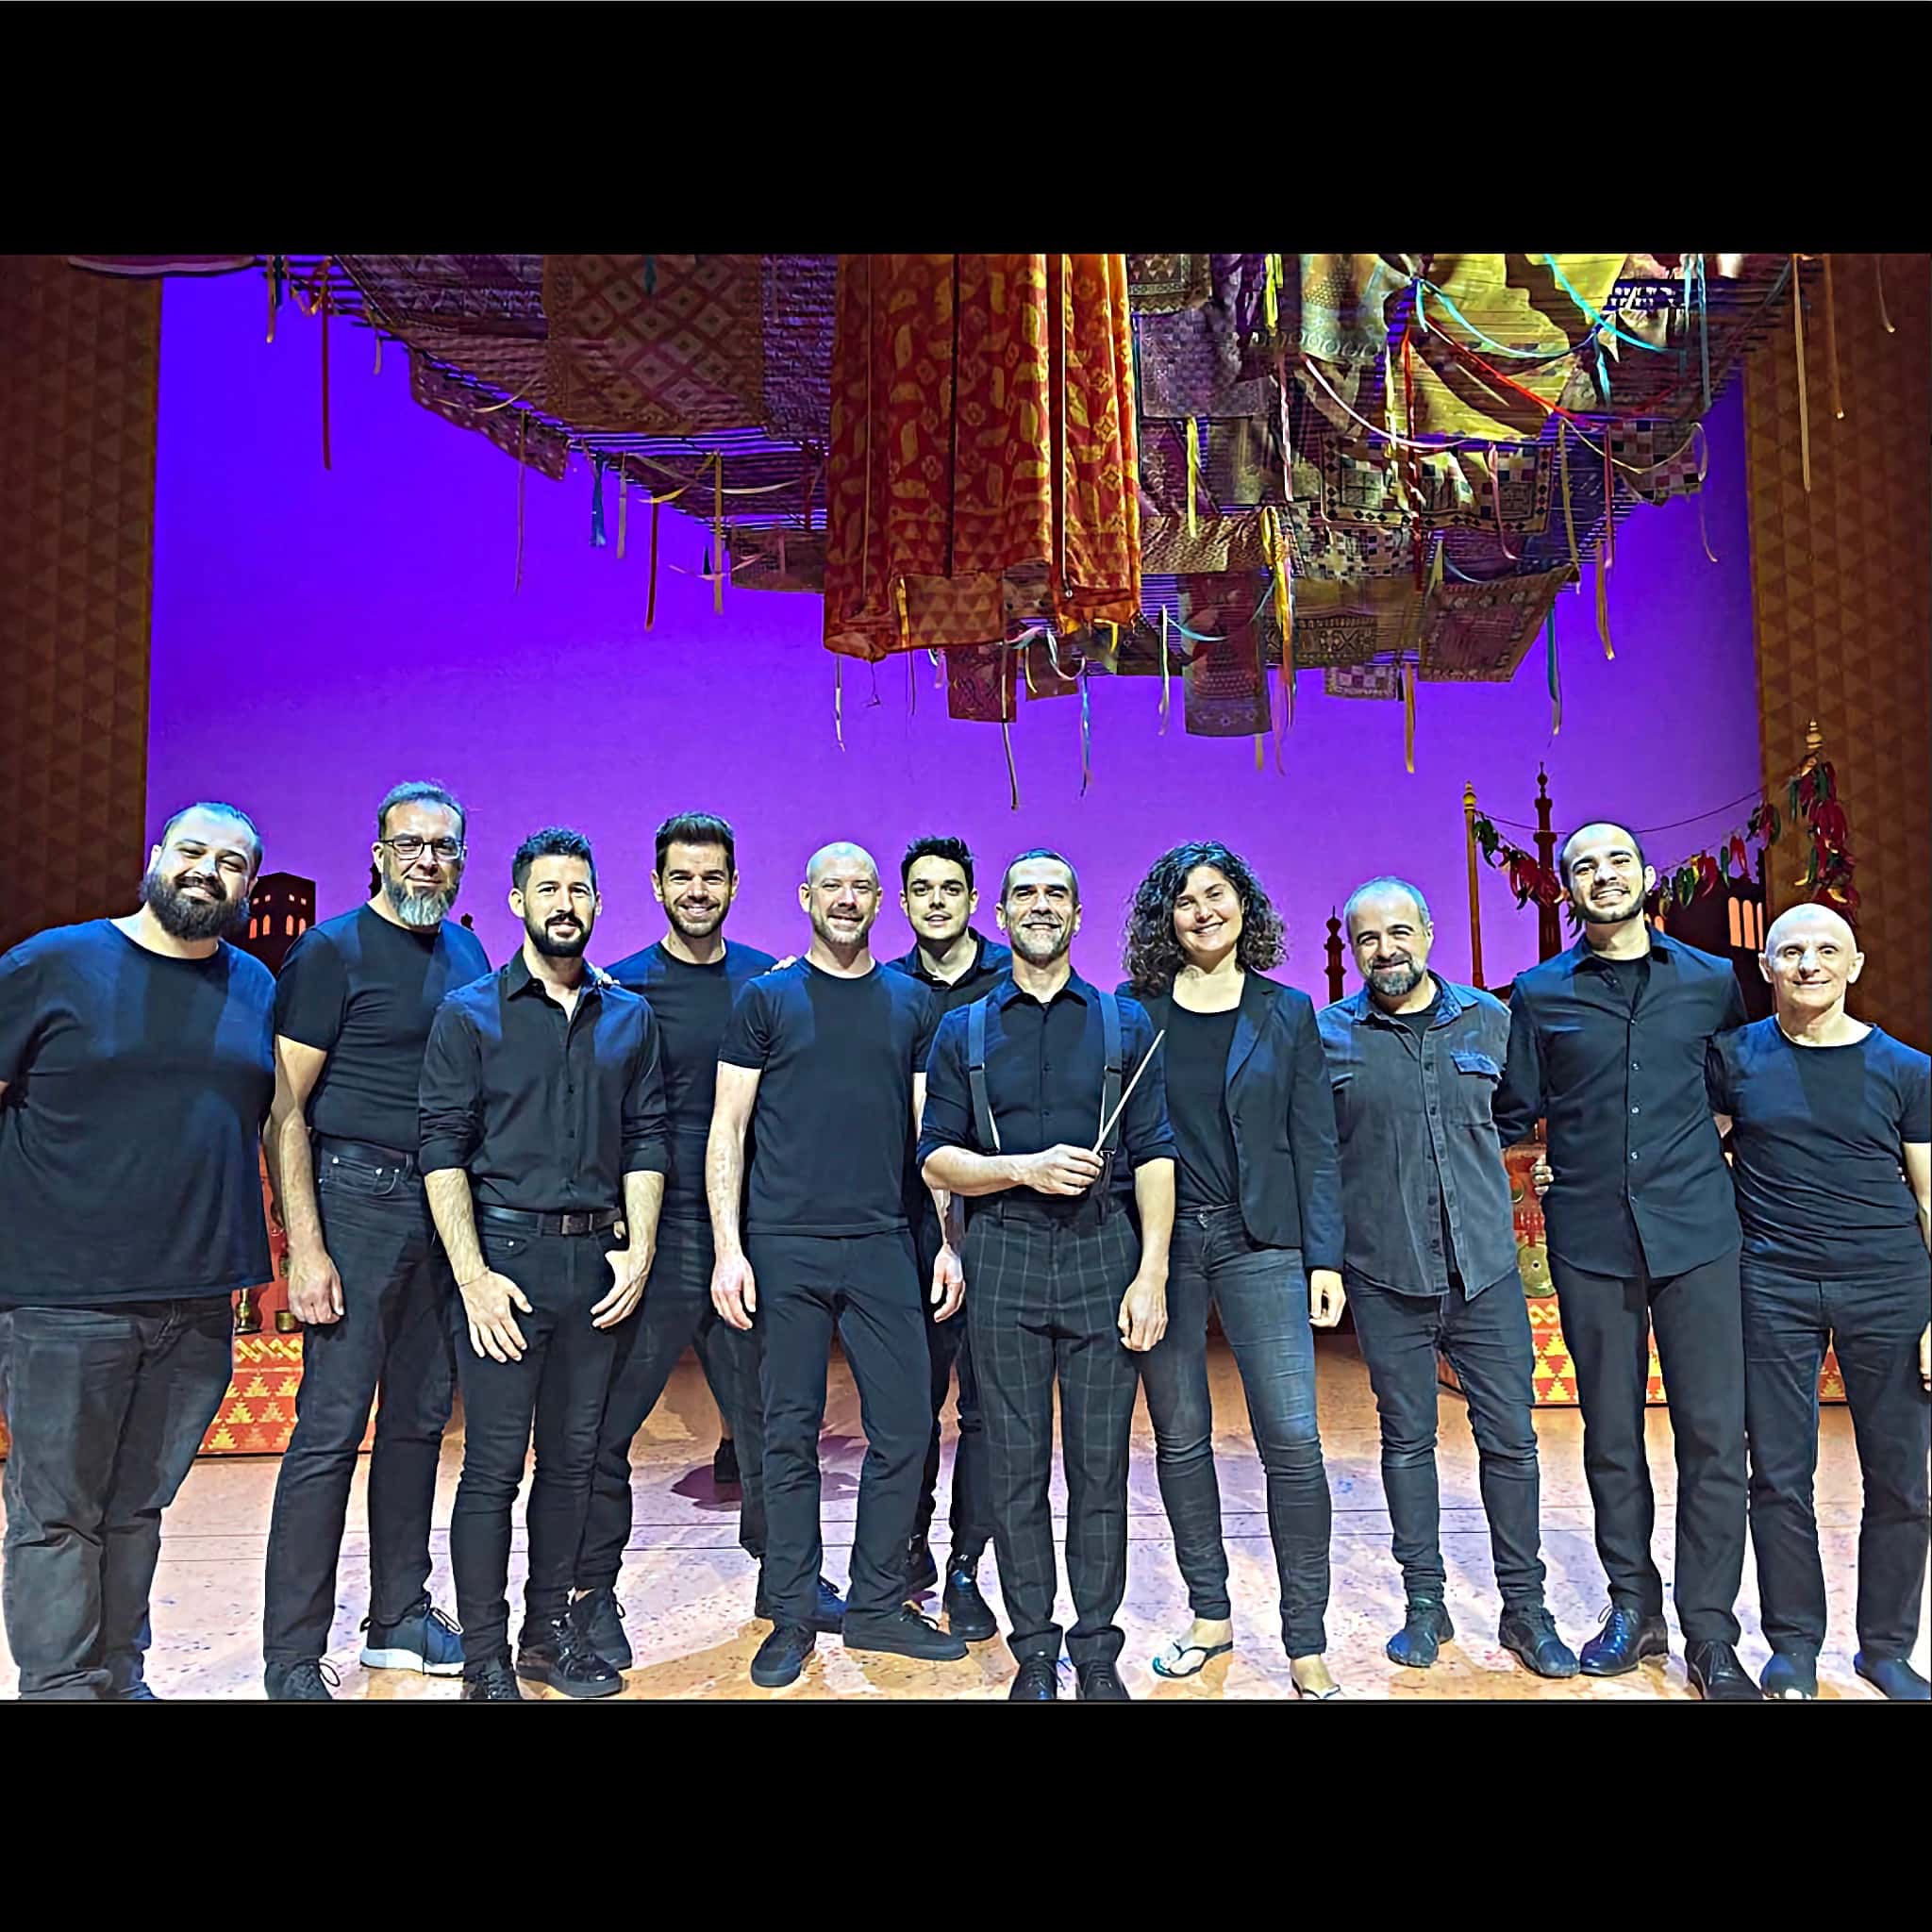 Full band photo from Ángel Crespo's drum set setup for the International Production of Broadway's Aladdin at the Teatro Coliseum in Madrid, Spain.